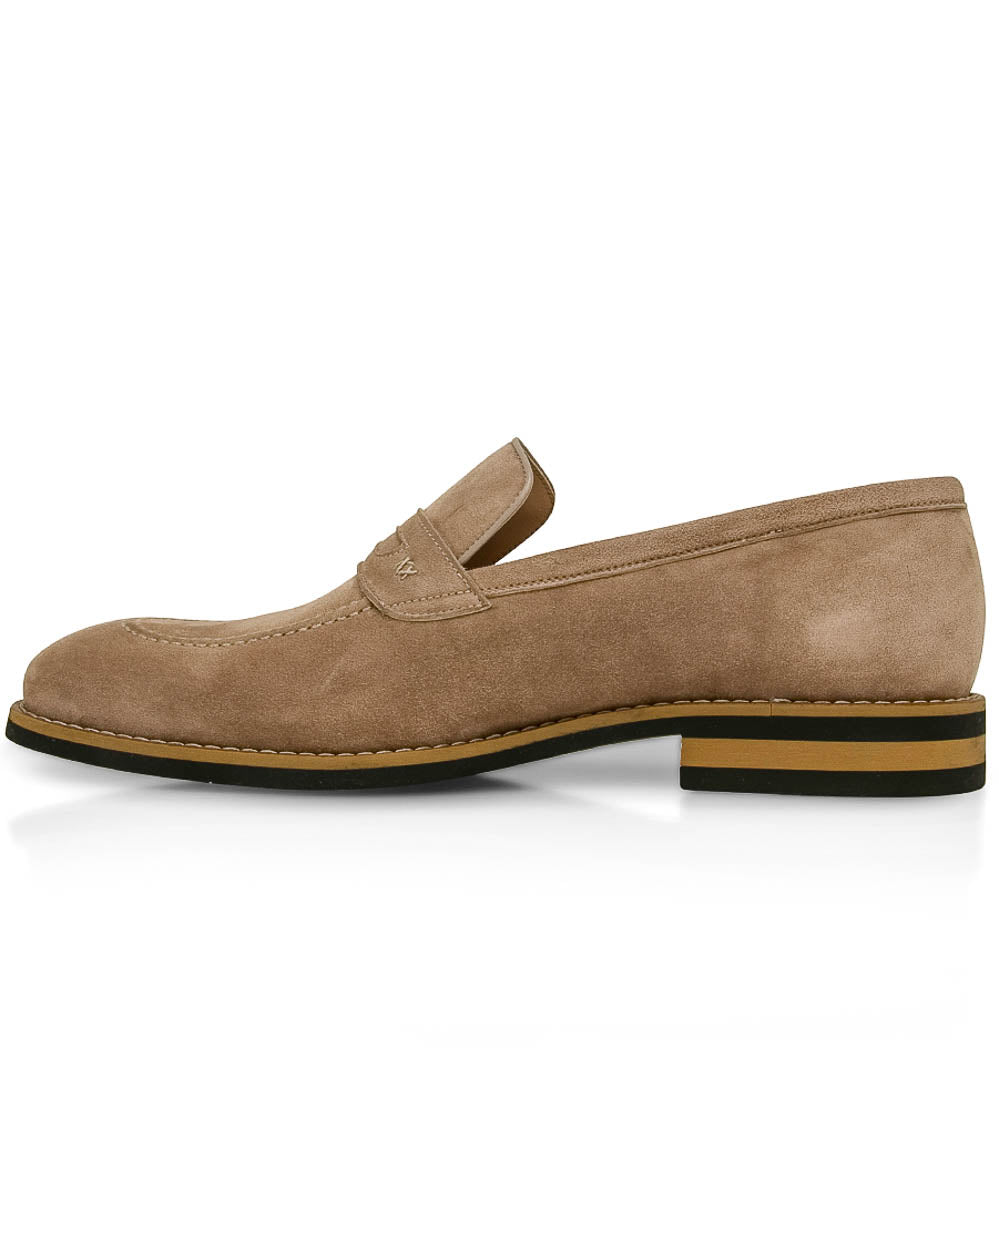 Palissandro Monaco Suede Penny Loafer